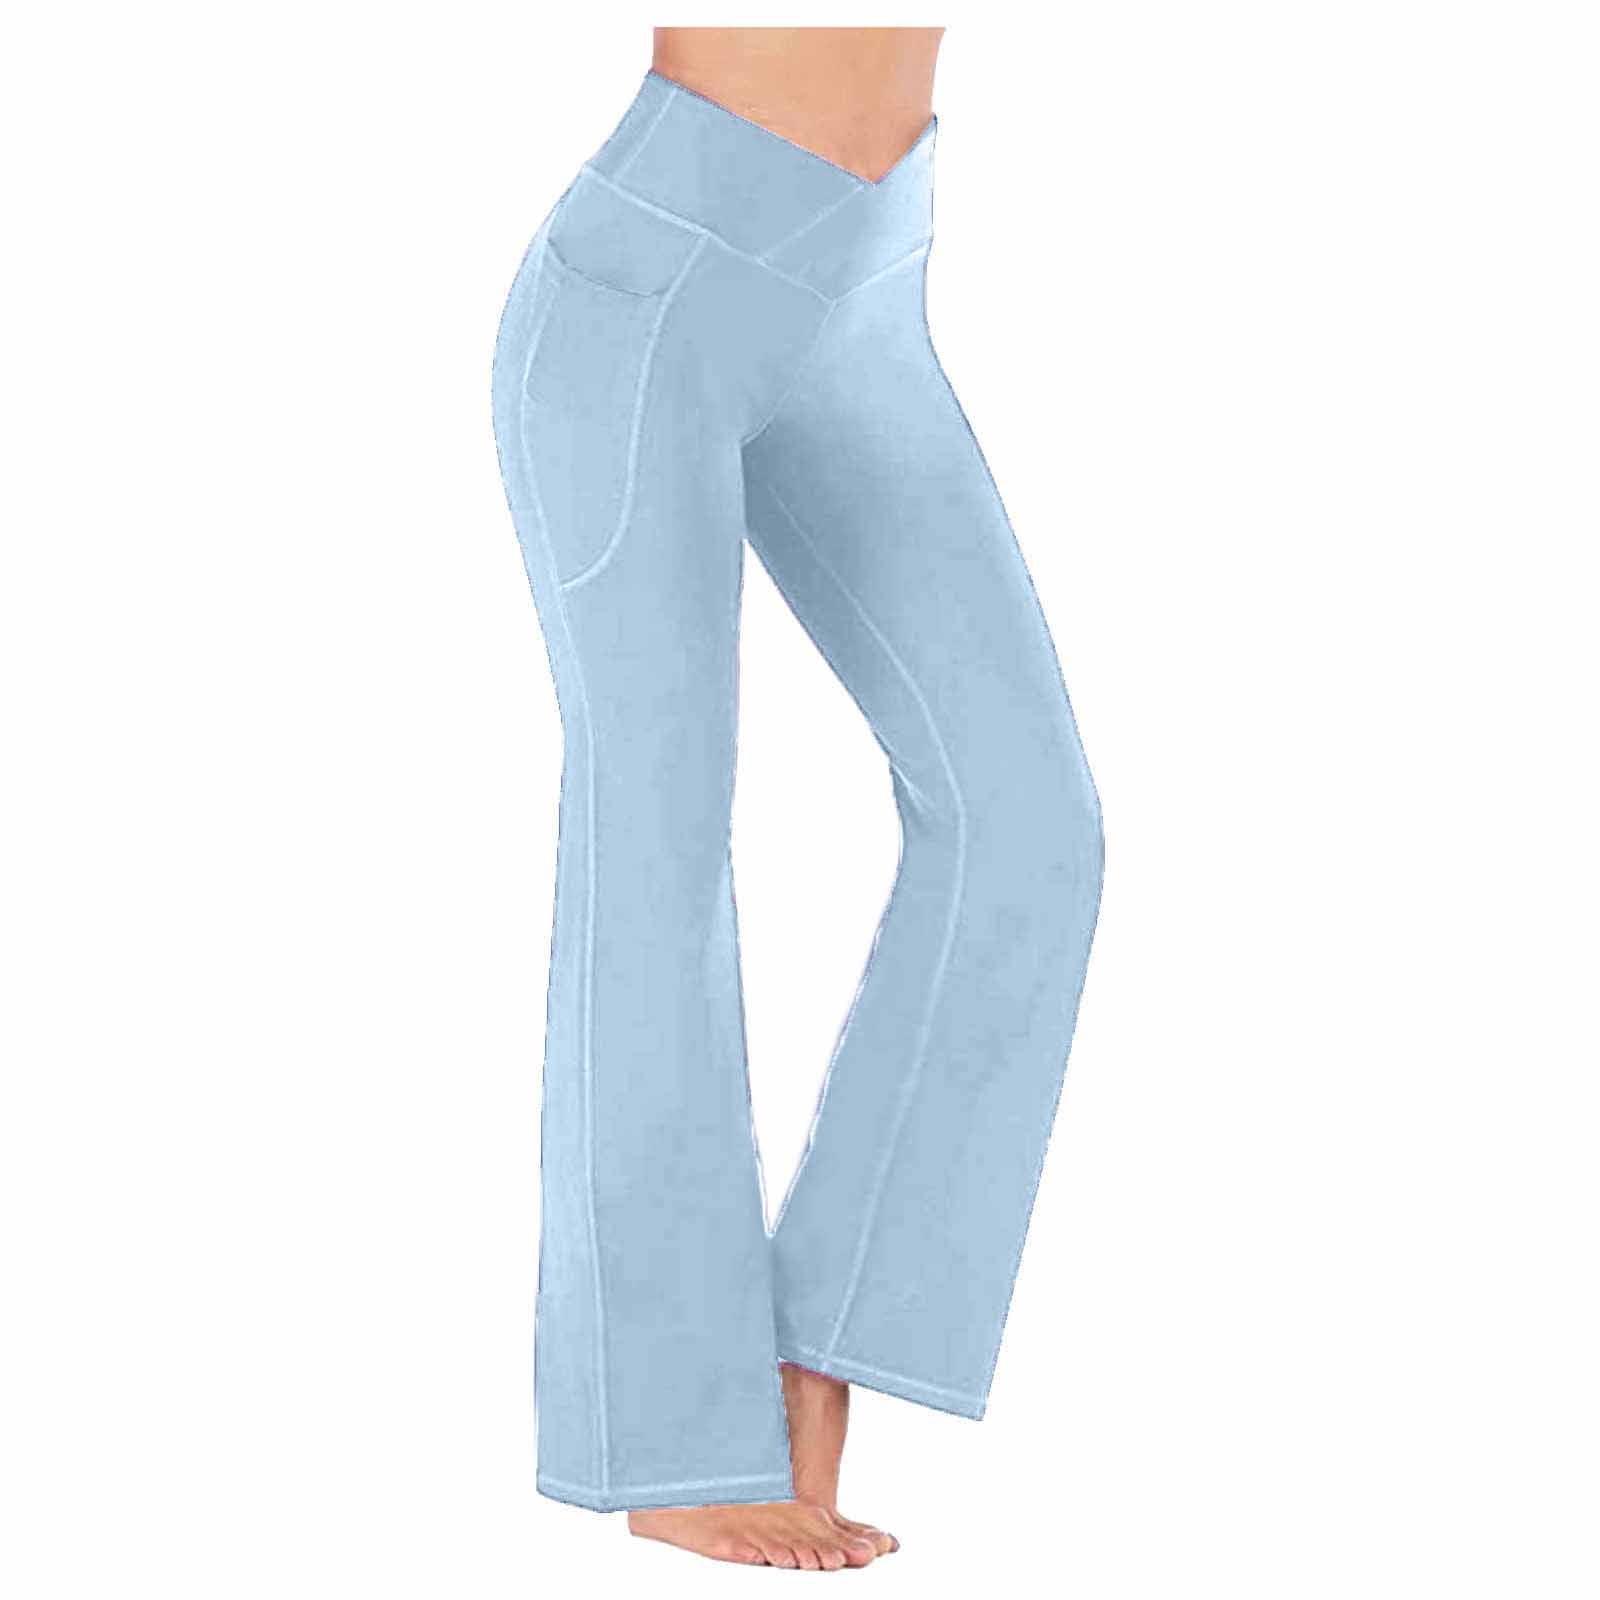 Hfyihgf Womens Casual Flare Leggings with Pockets Bootcut Yoga Pants V  Crossover Hight Waisted Stretchy Workout Pants Elegant Trousers(Light  Blue,S)